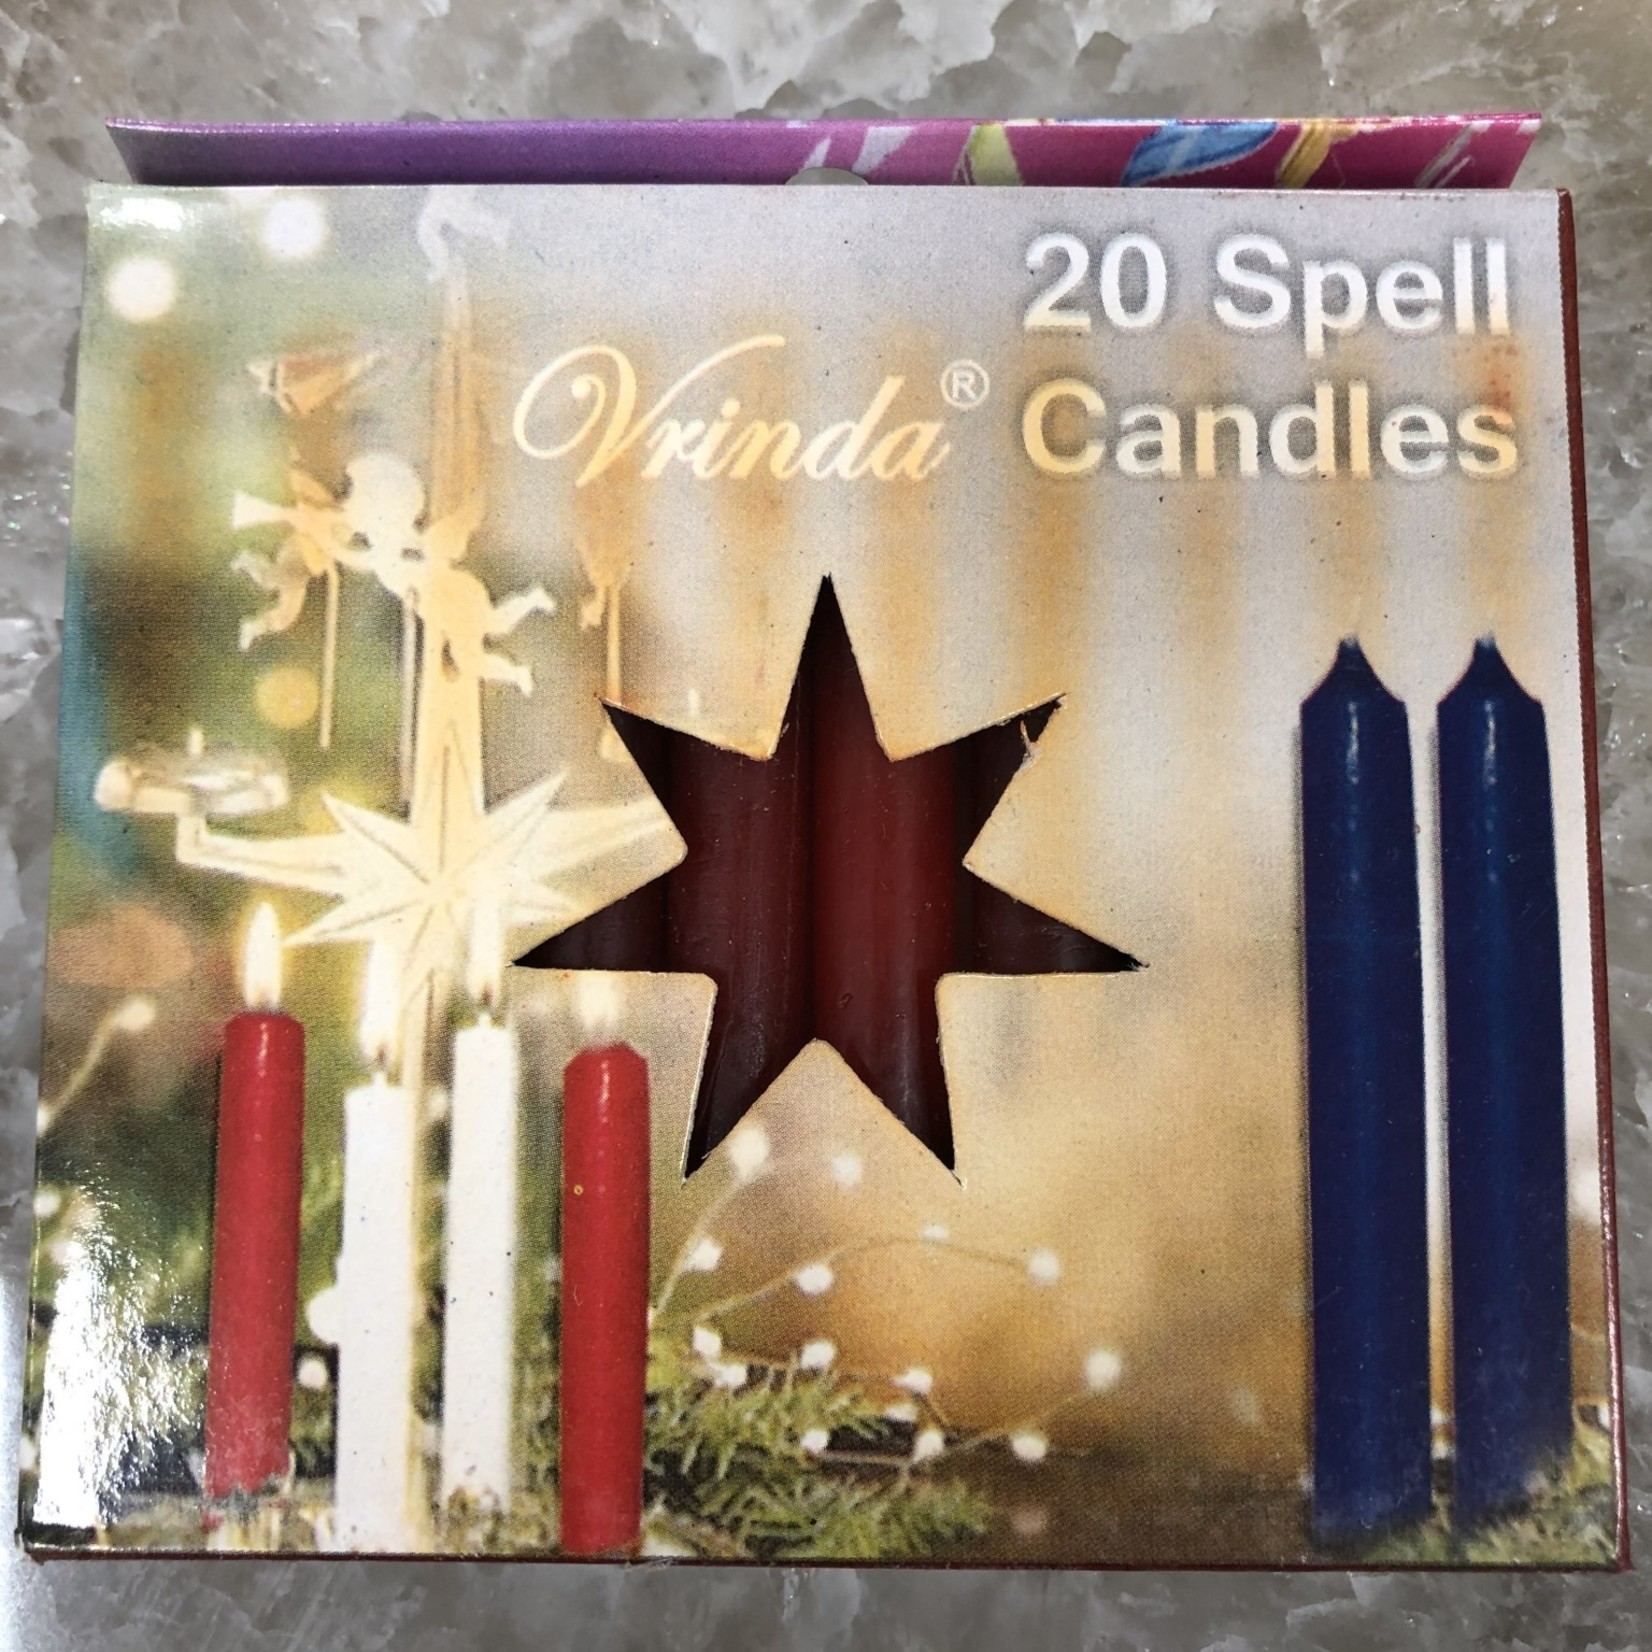 Vrinda Box of 20 Multicolor Chime Spell Candles - 4"